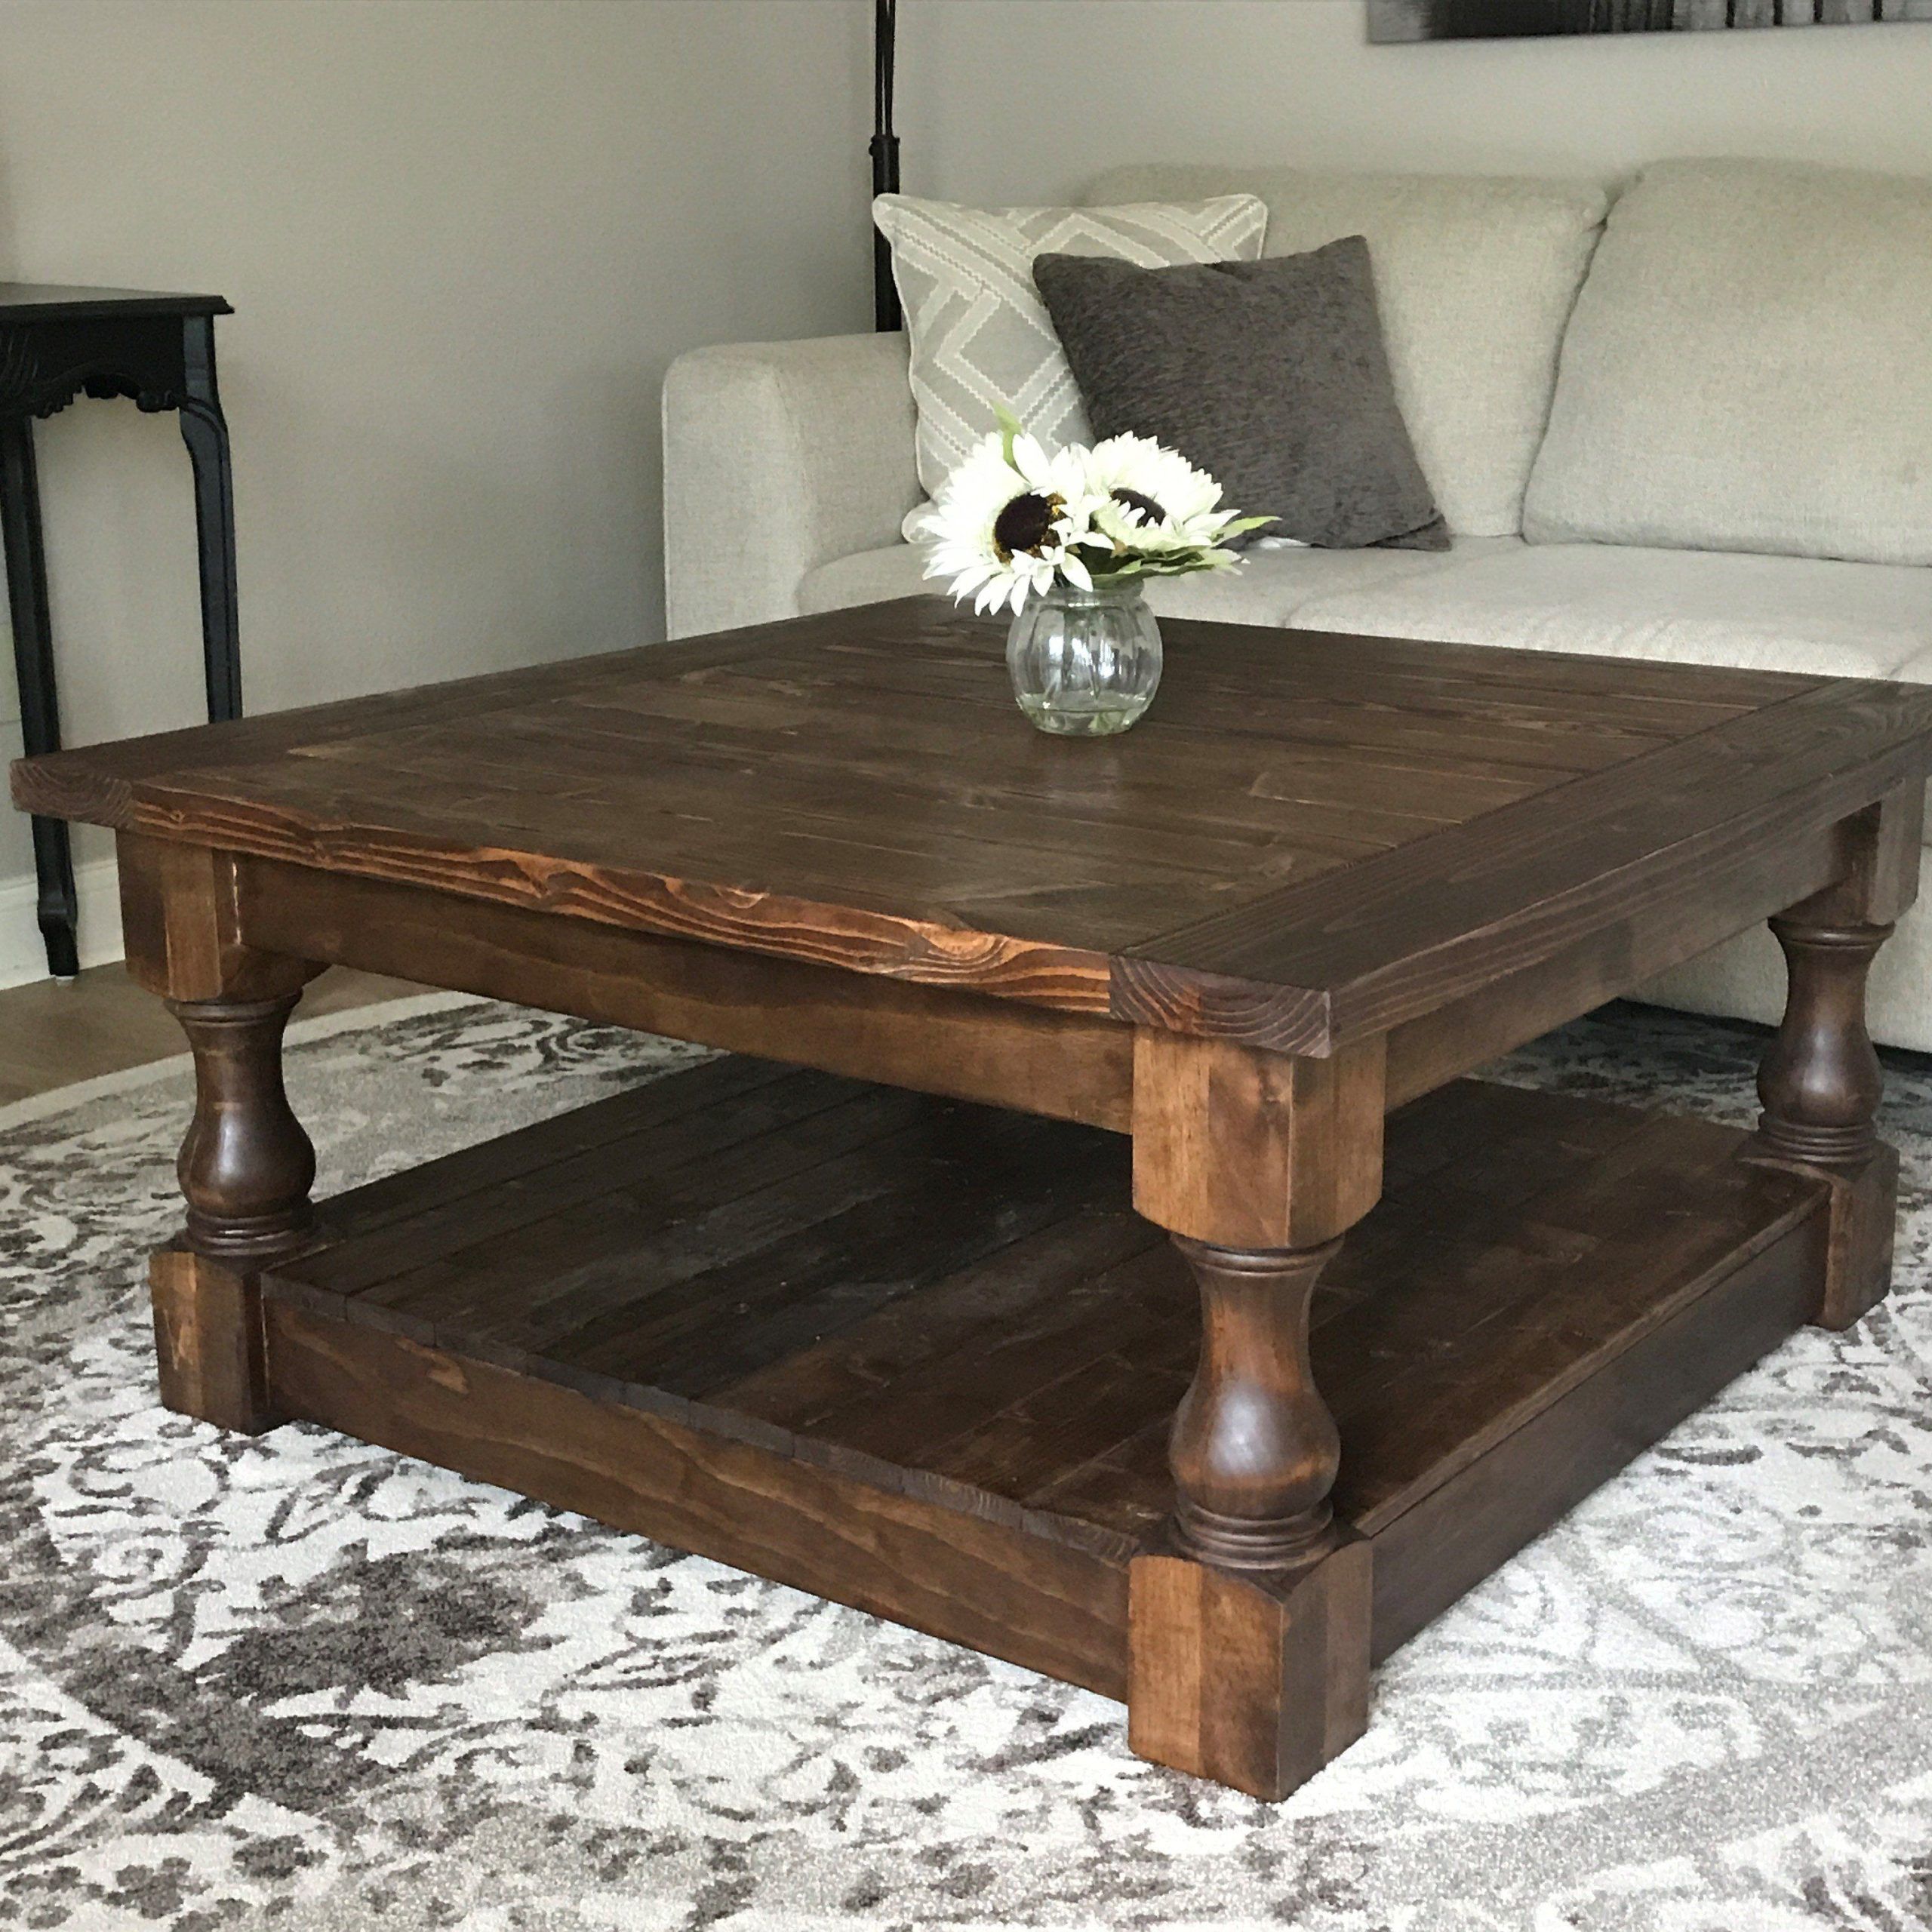 10+ Rustic Coffee Table Decor – Decoomo With Brown Rustic Coffee Tables (View 11 of 20)